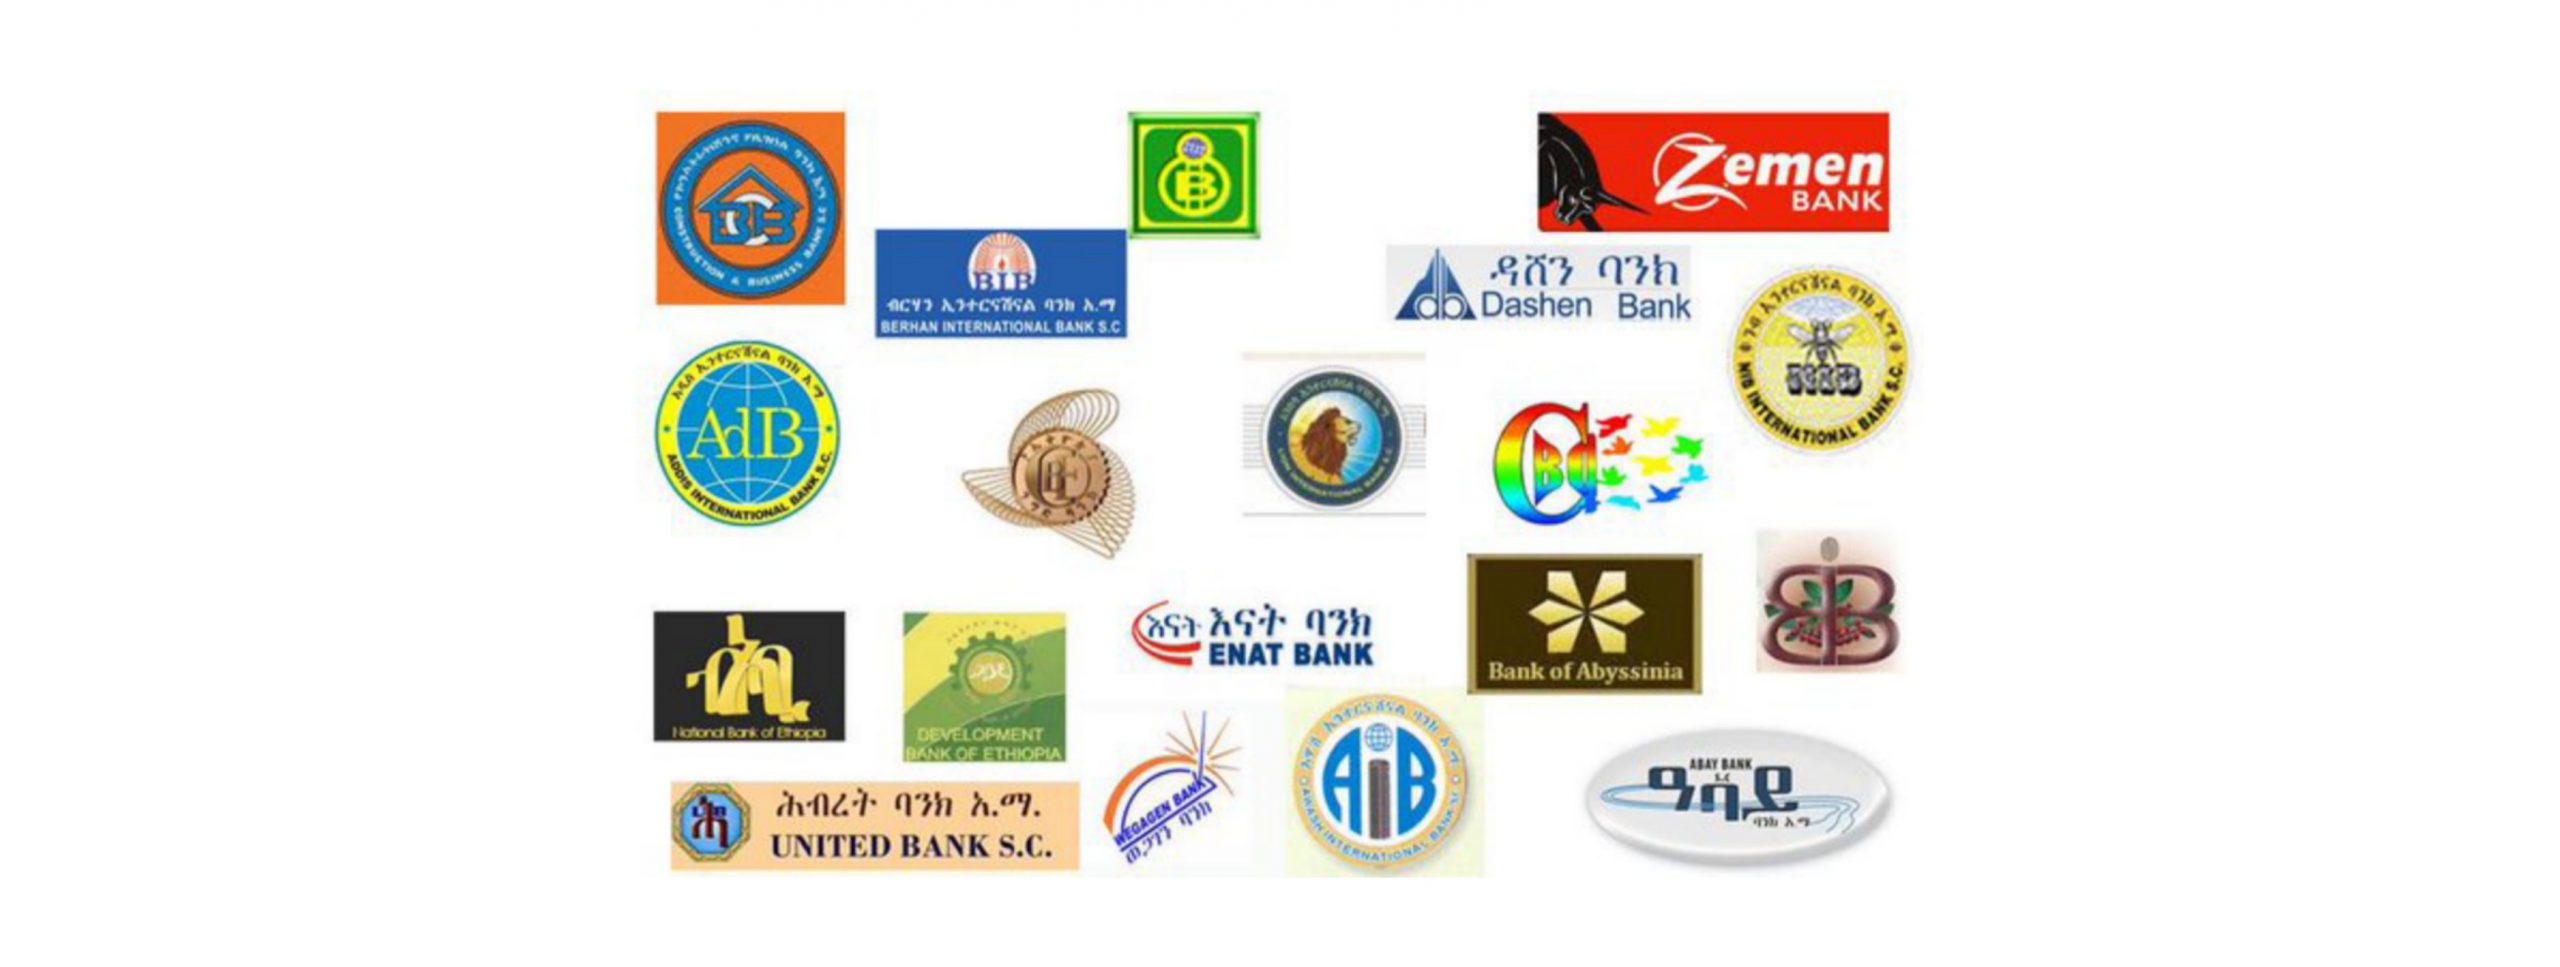 Annual Report for Banks in Ethiopia 2021/22